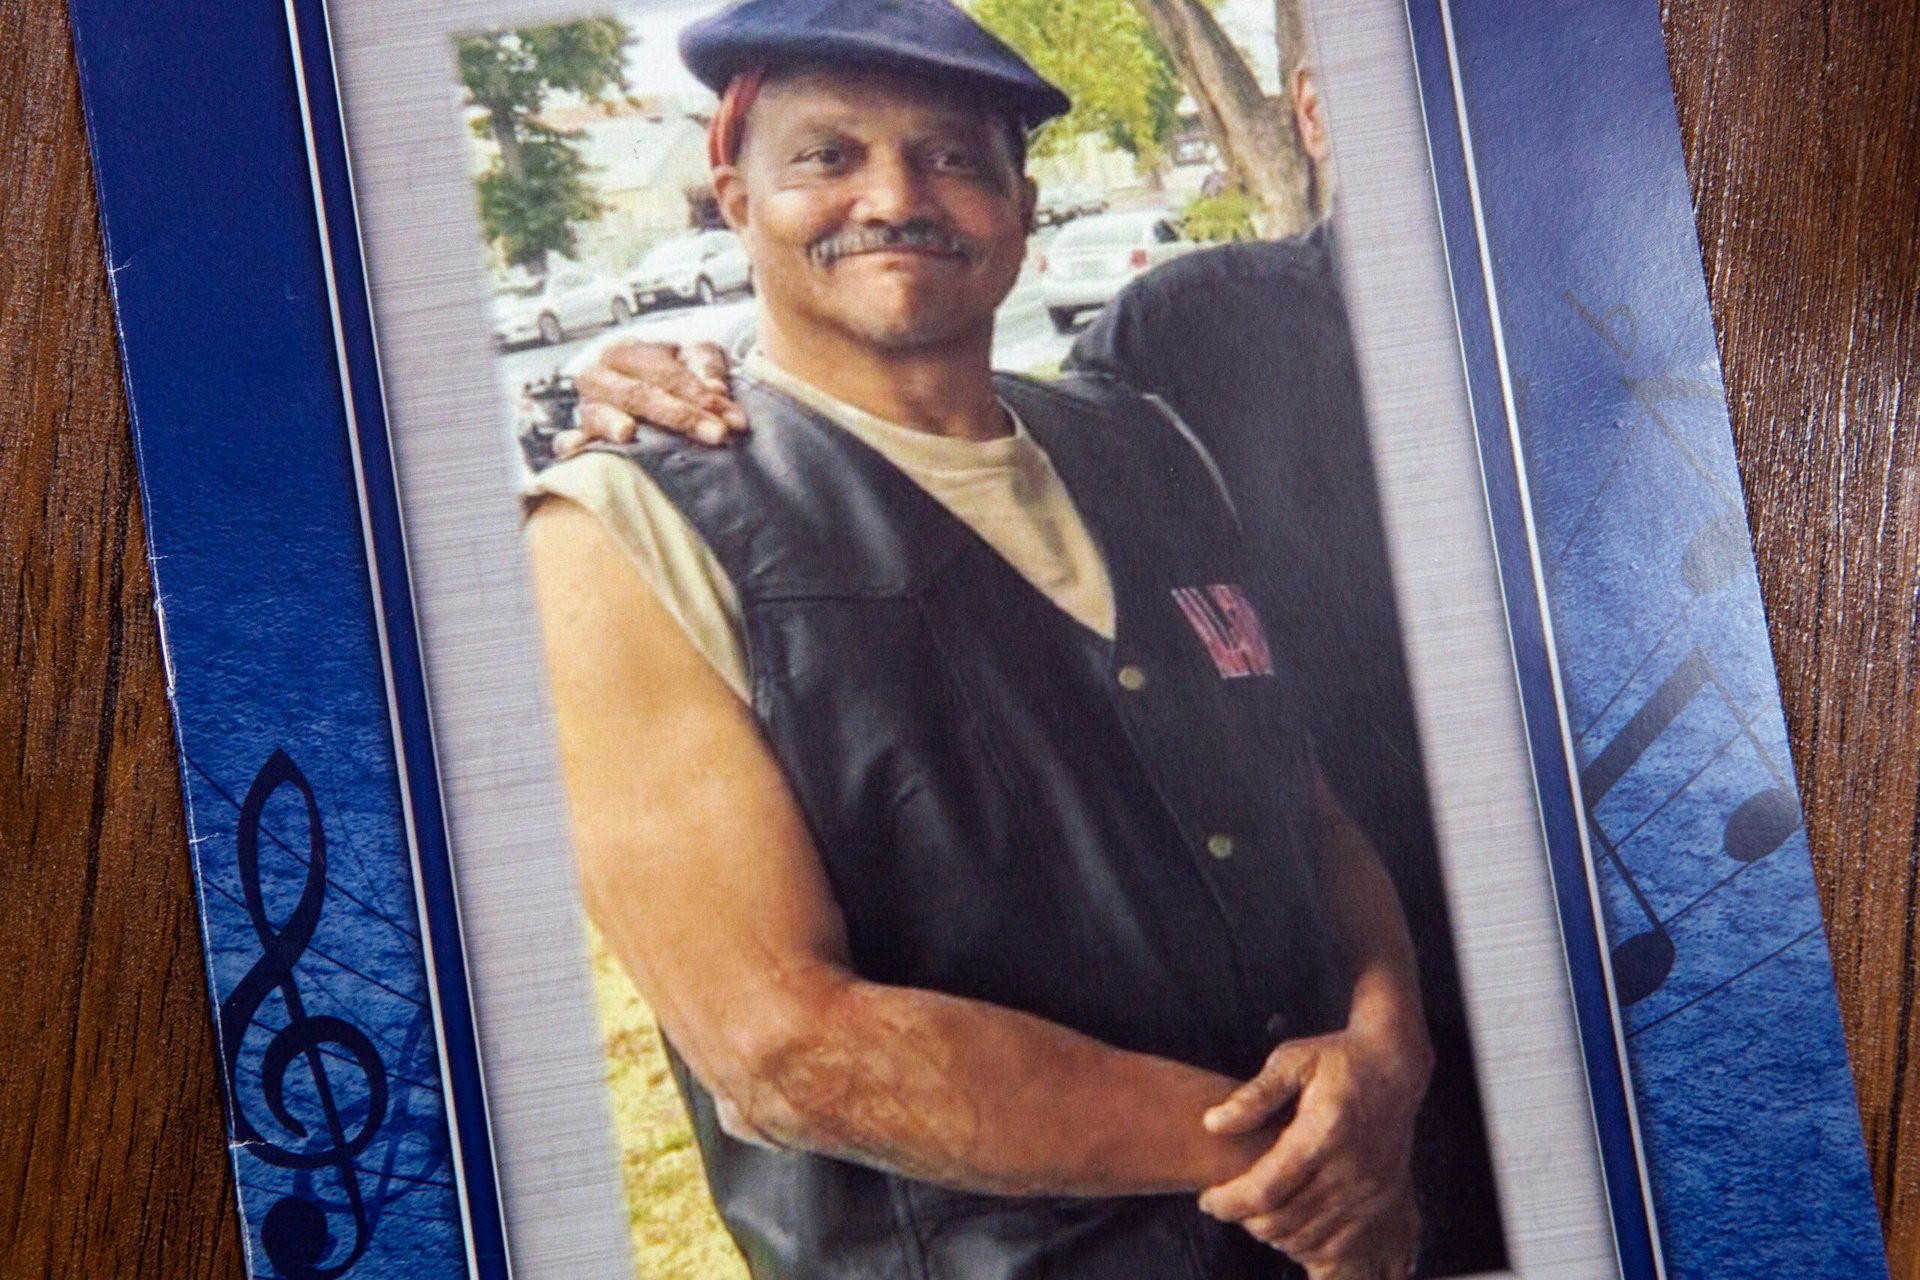 Andre Butler is seen smiling on the cover of his funeral program.